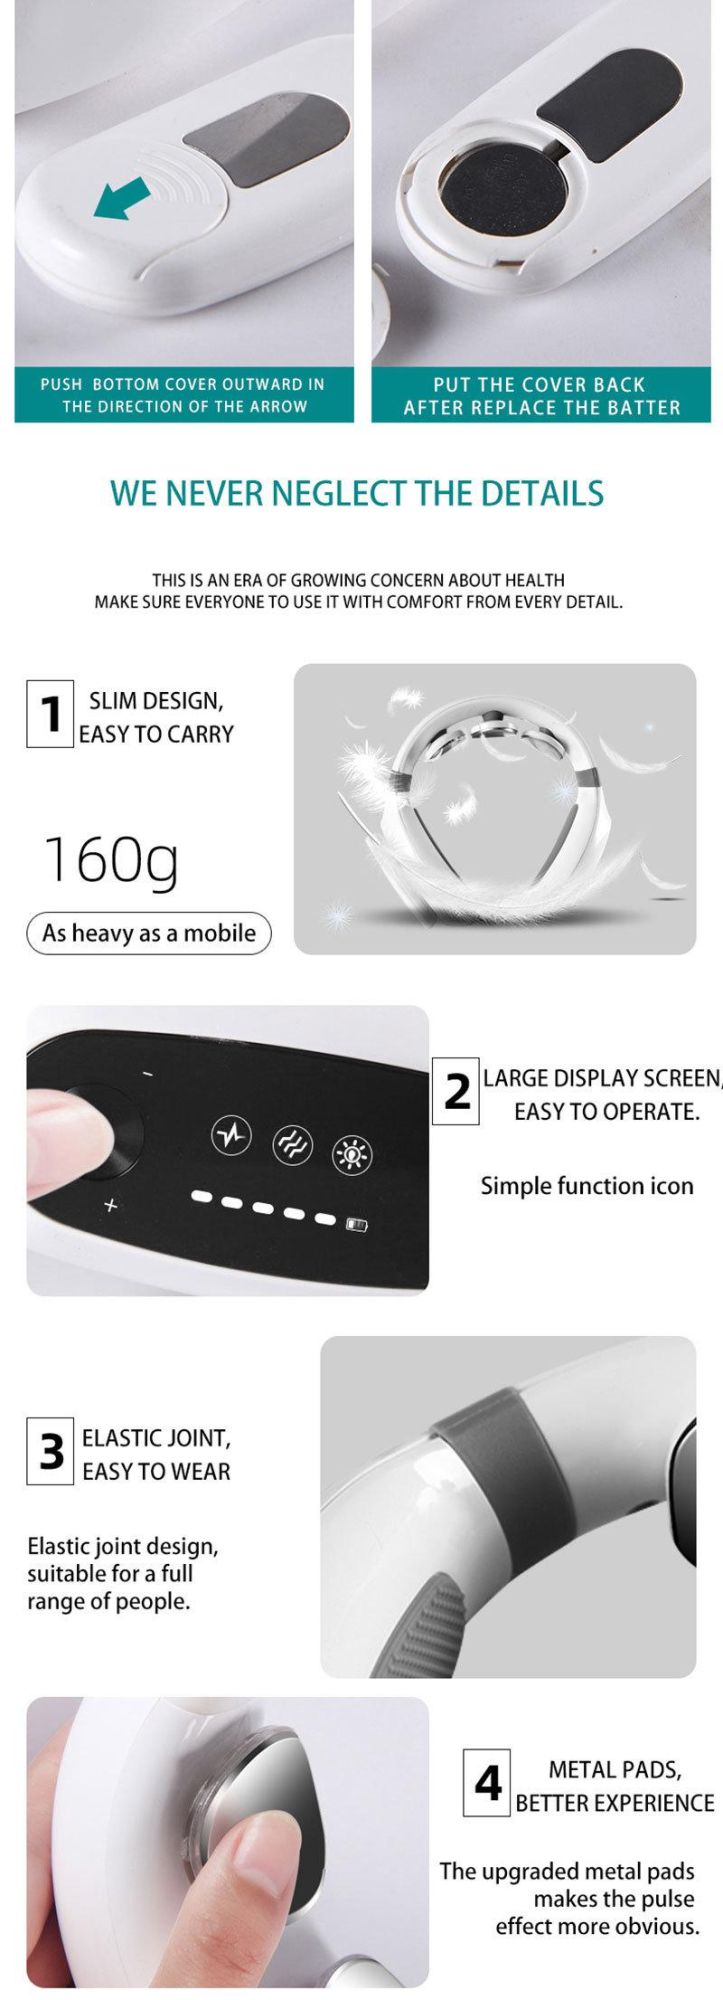 Hezheng Smart Electric Neck and Shoulder Massager Pain Relief Tool Health Care Relaxation Cervical 4D Magnetic Therapy Massage Machine